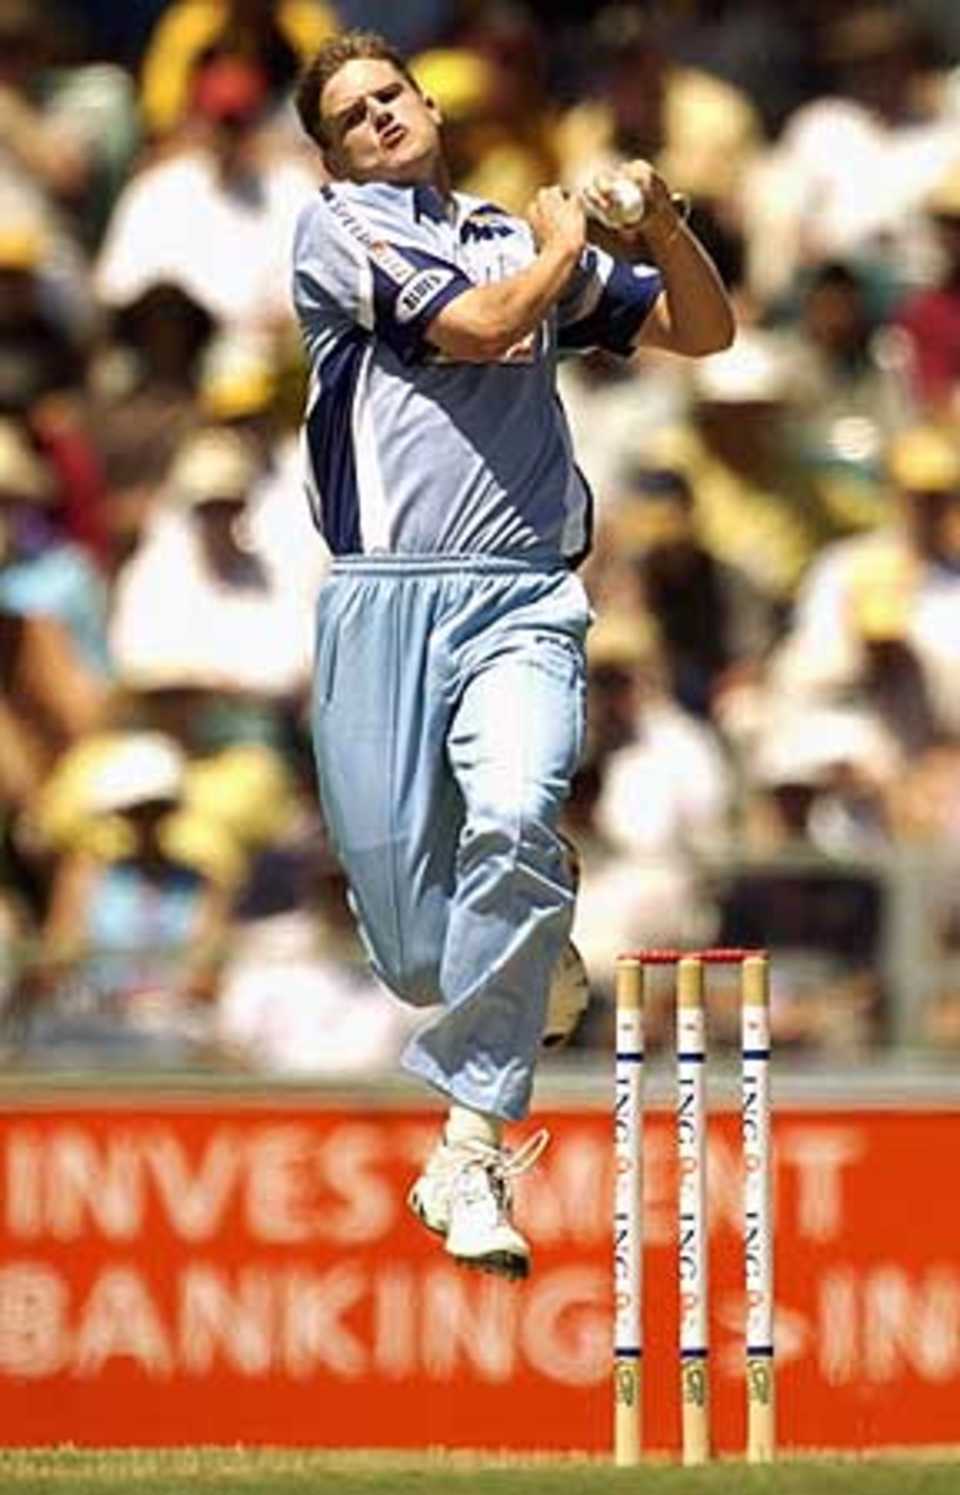 PERTH - FEBRUARY 23: Nathan Bracken of the Blues in action during the ING Cup Final between the Western Warriors and NSW Blues held at the WACA ground in Perth, Australia on February 23, 2003.